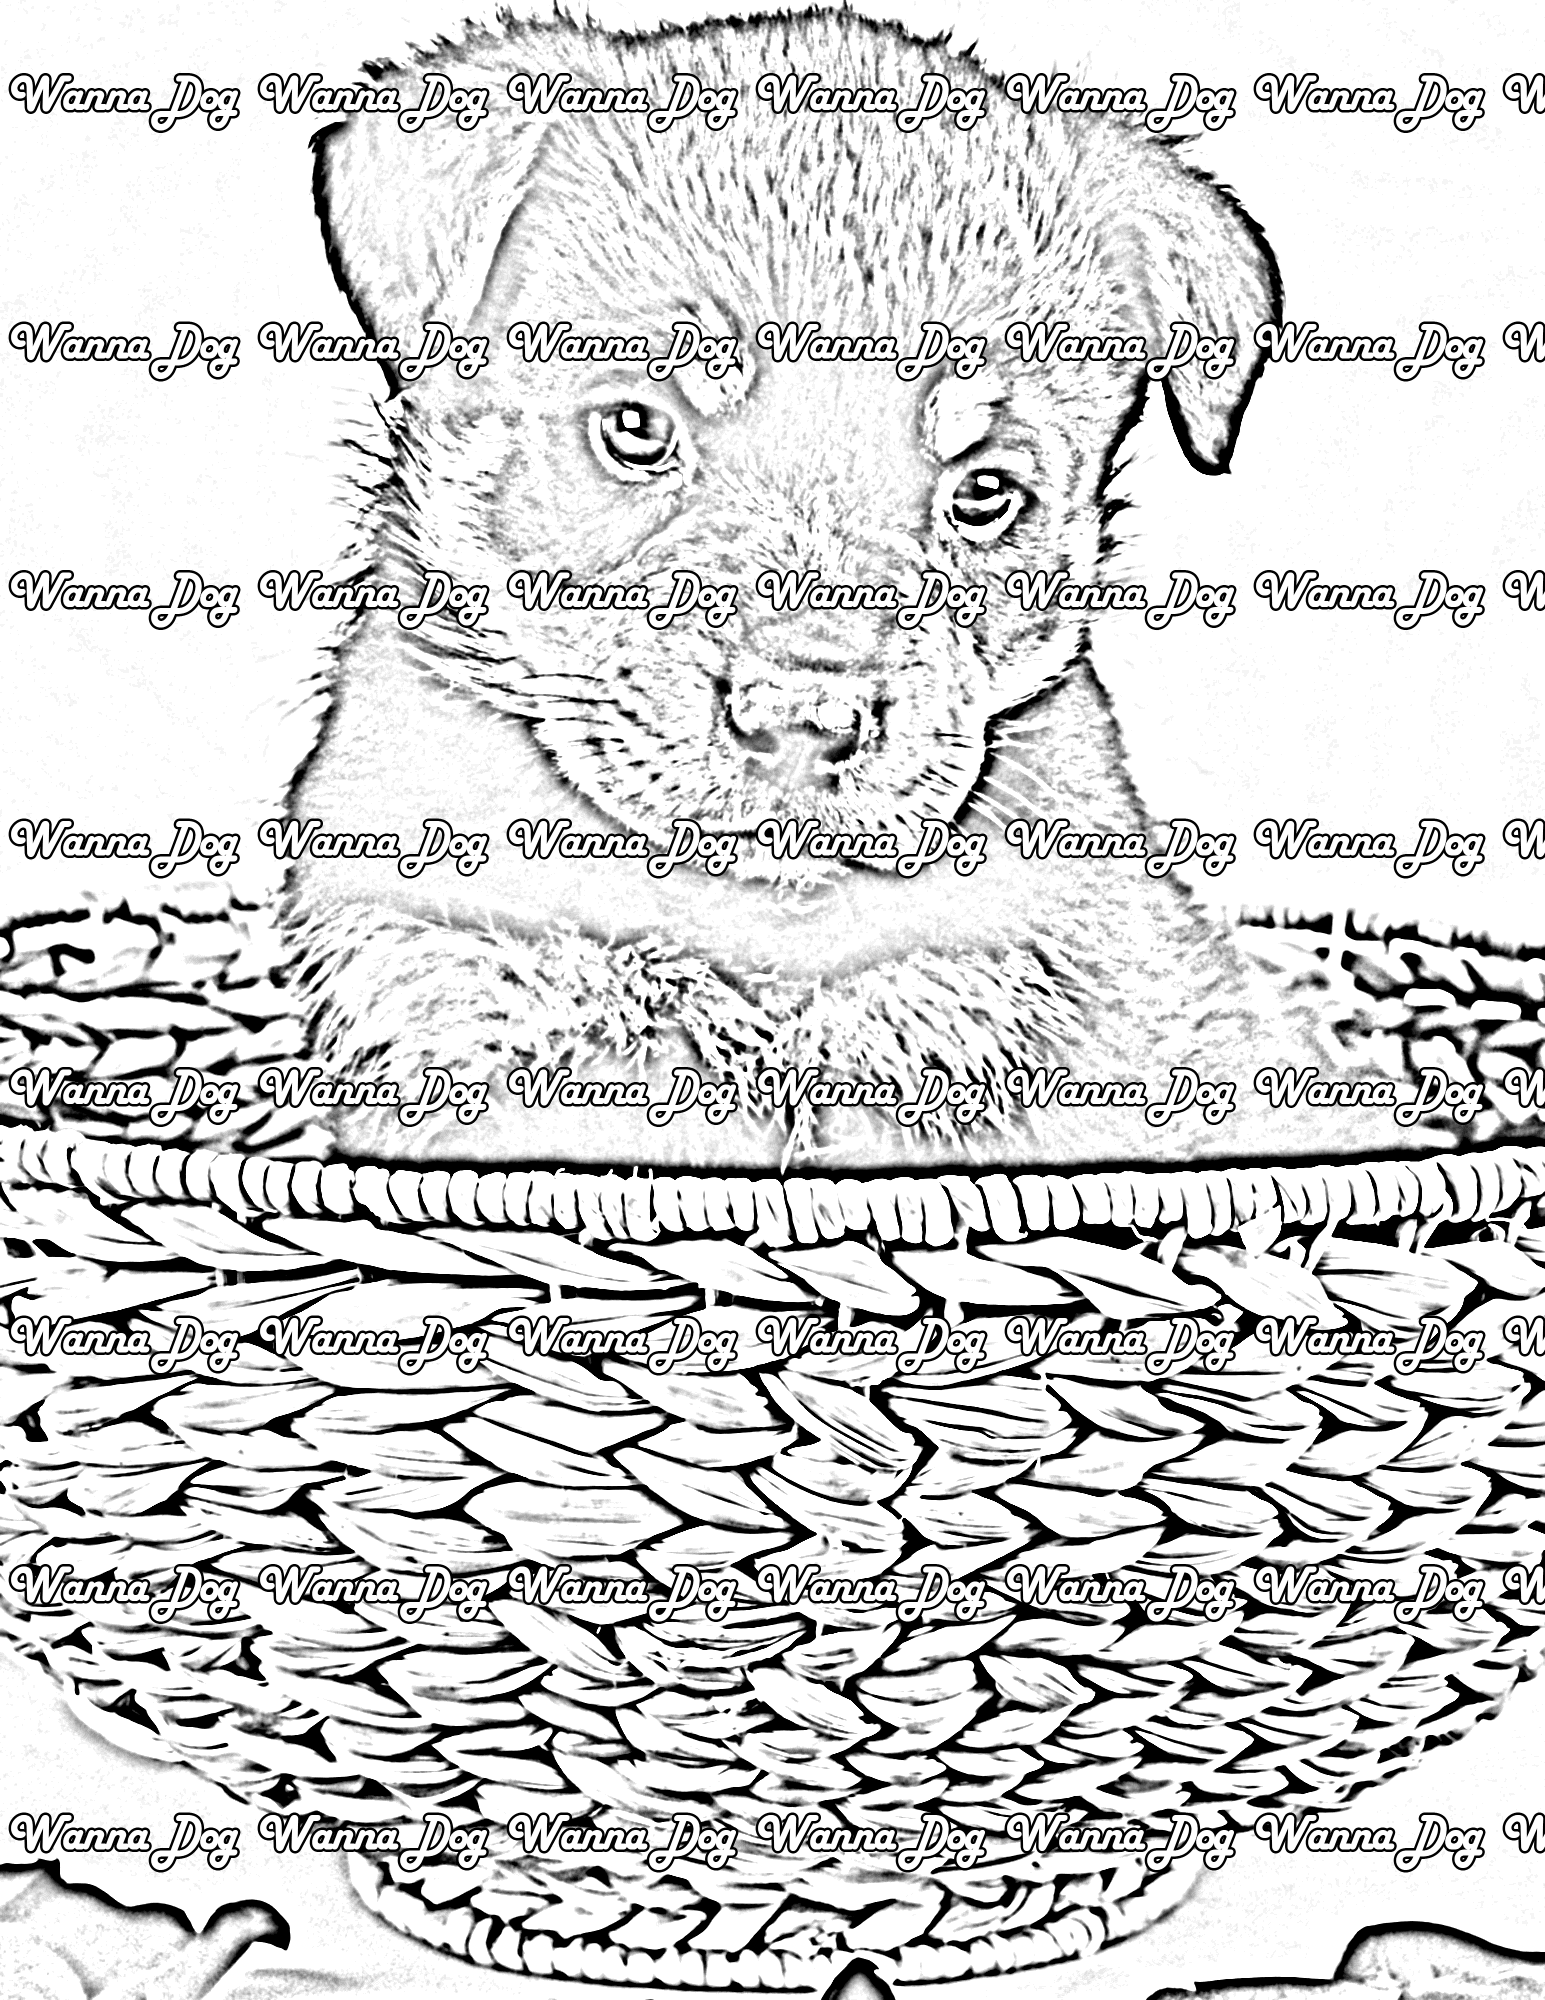 Rottweiler Puppy Coloring Page of a Rottweiler Puppy in a basket